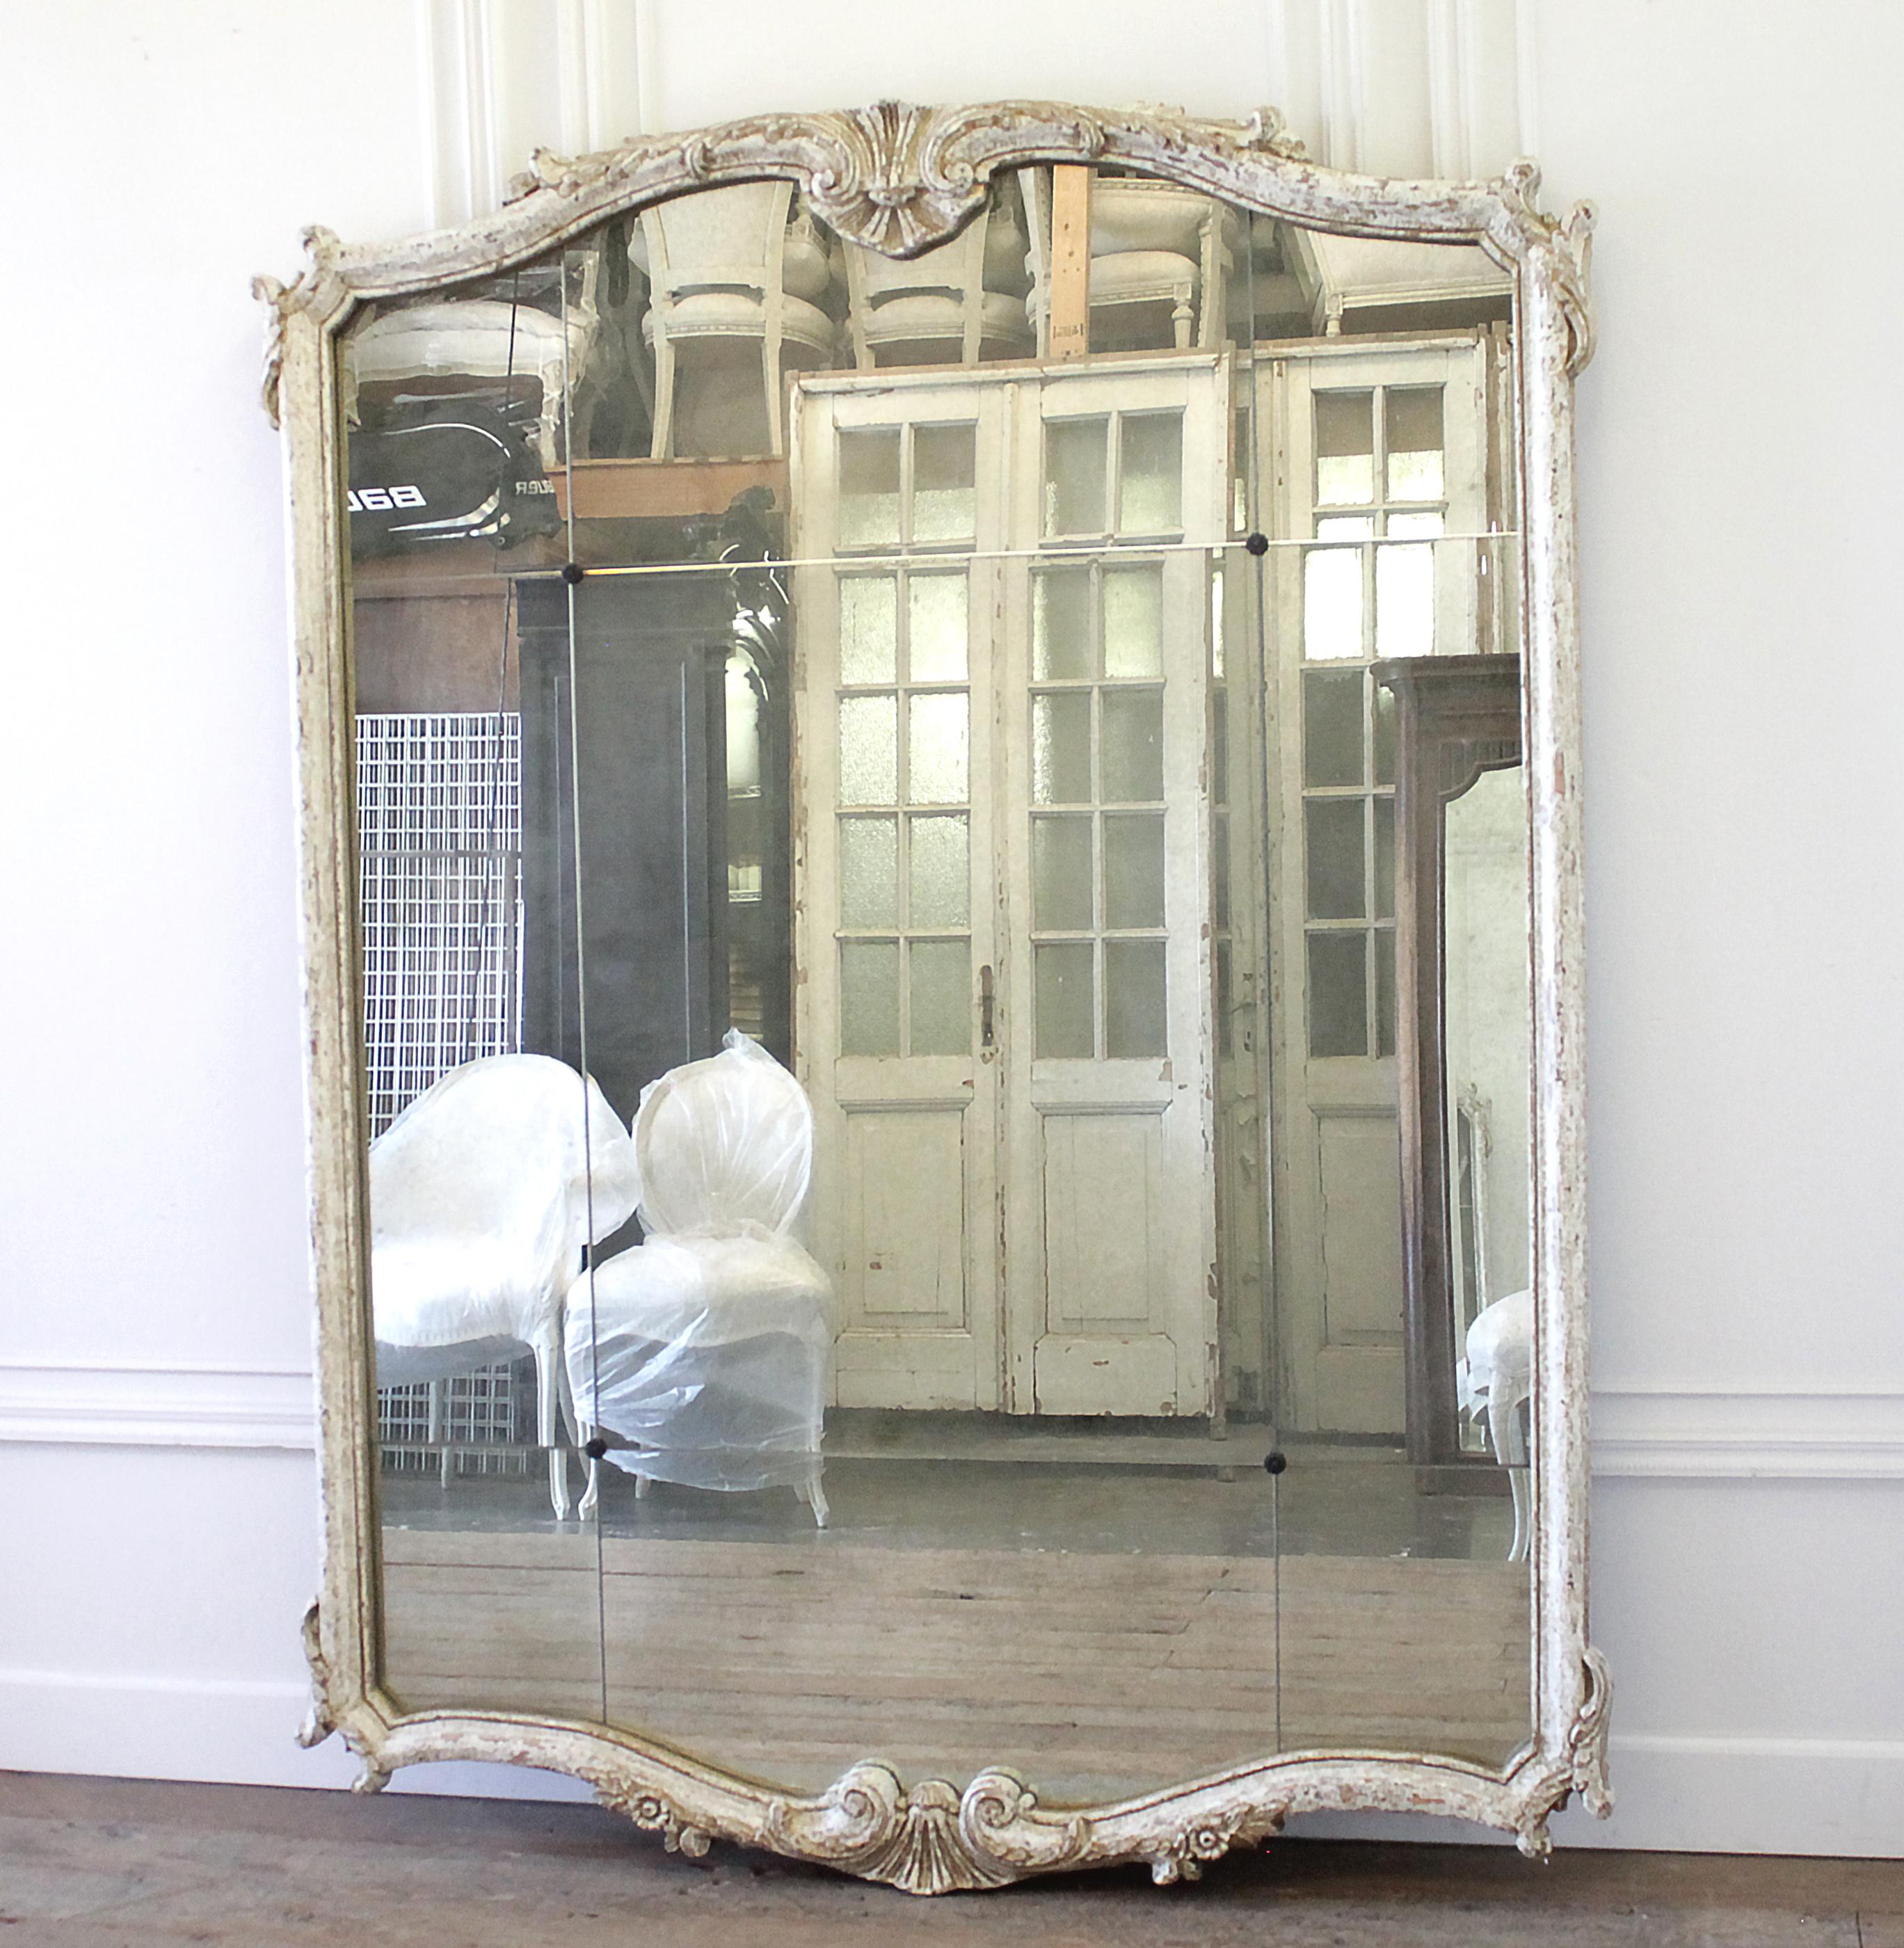 Vintage decorative mirror in wood frame.
Gold and creamy white distressed frame, with antique mirror panels, and rosettes.
Ready to hang.
Measures: 60